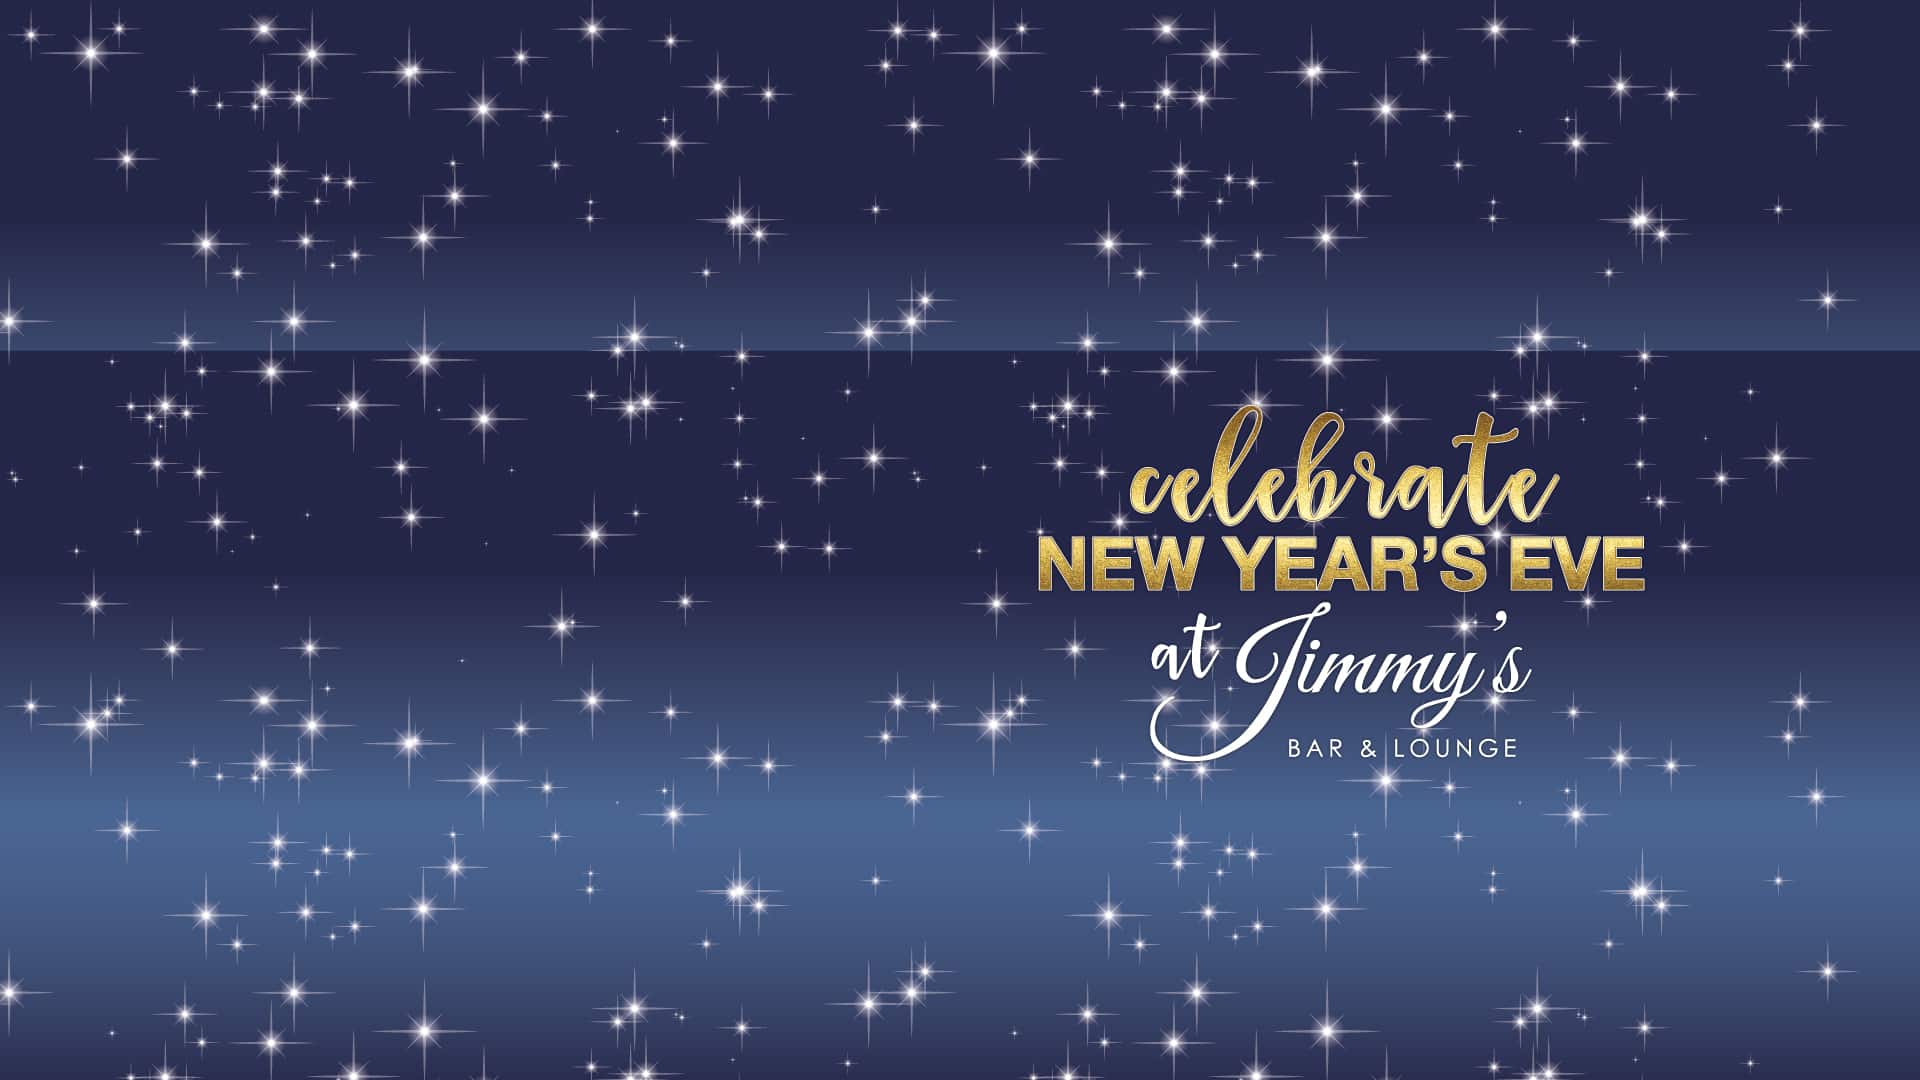 New Year's Eve at Jimmy's Bar & Lounge